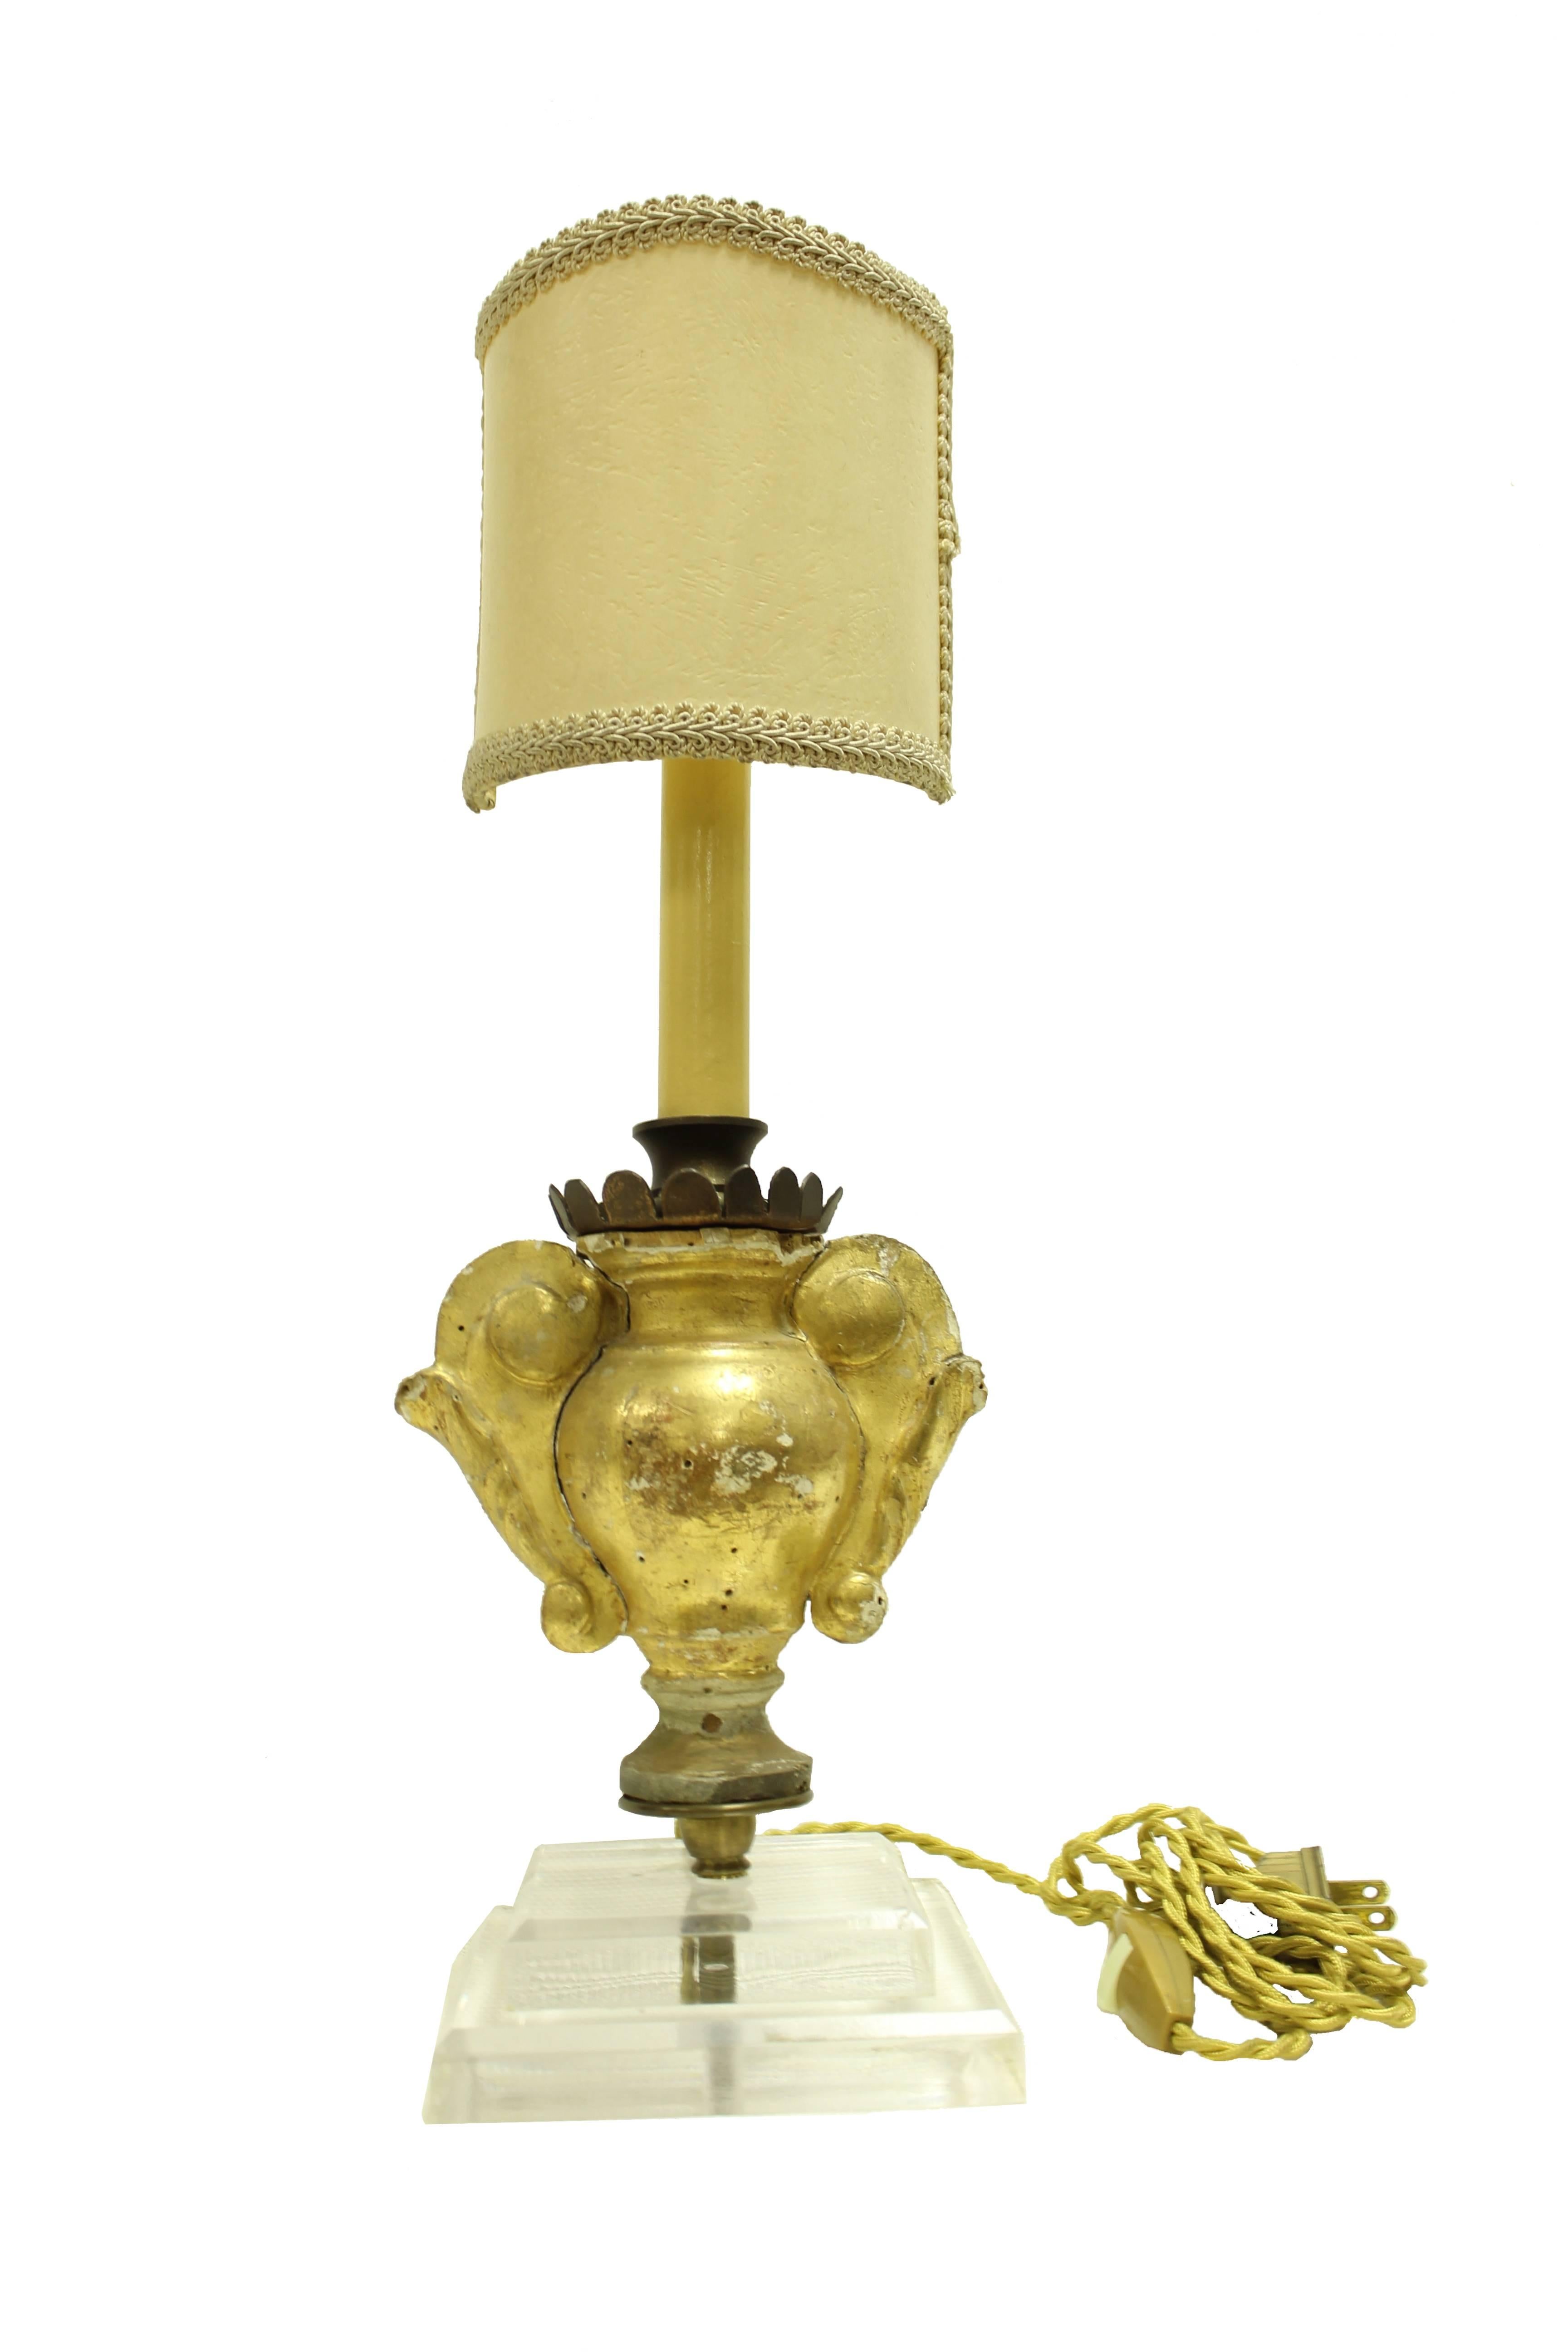 Pair of Italian 18c-19c Fragments Converted to Lamps with Acrylic Base. Beautiful gilded wooden fragments converted into lamps on acrylic bases. French wiring and small shield shades included. Acrylic adds a modern touch to these repurposed